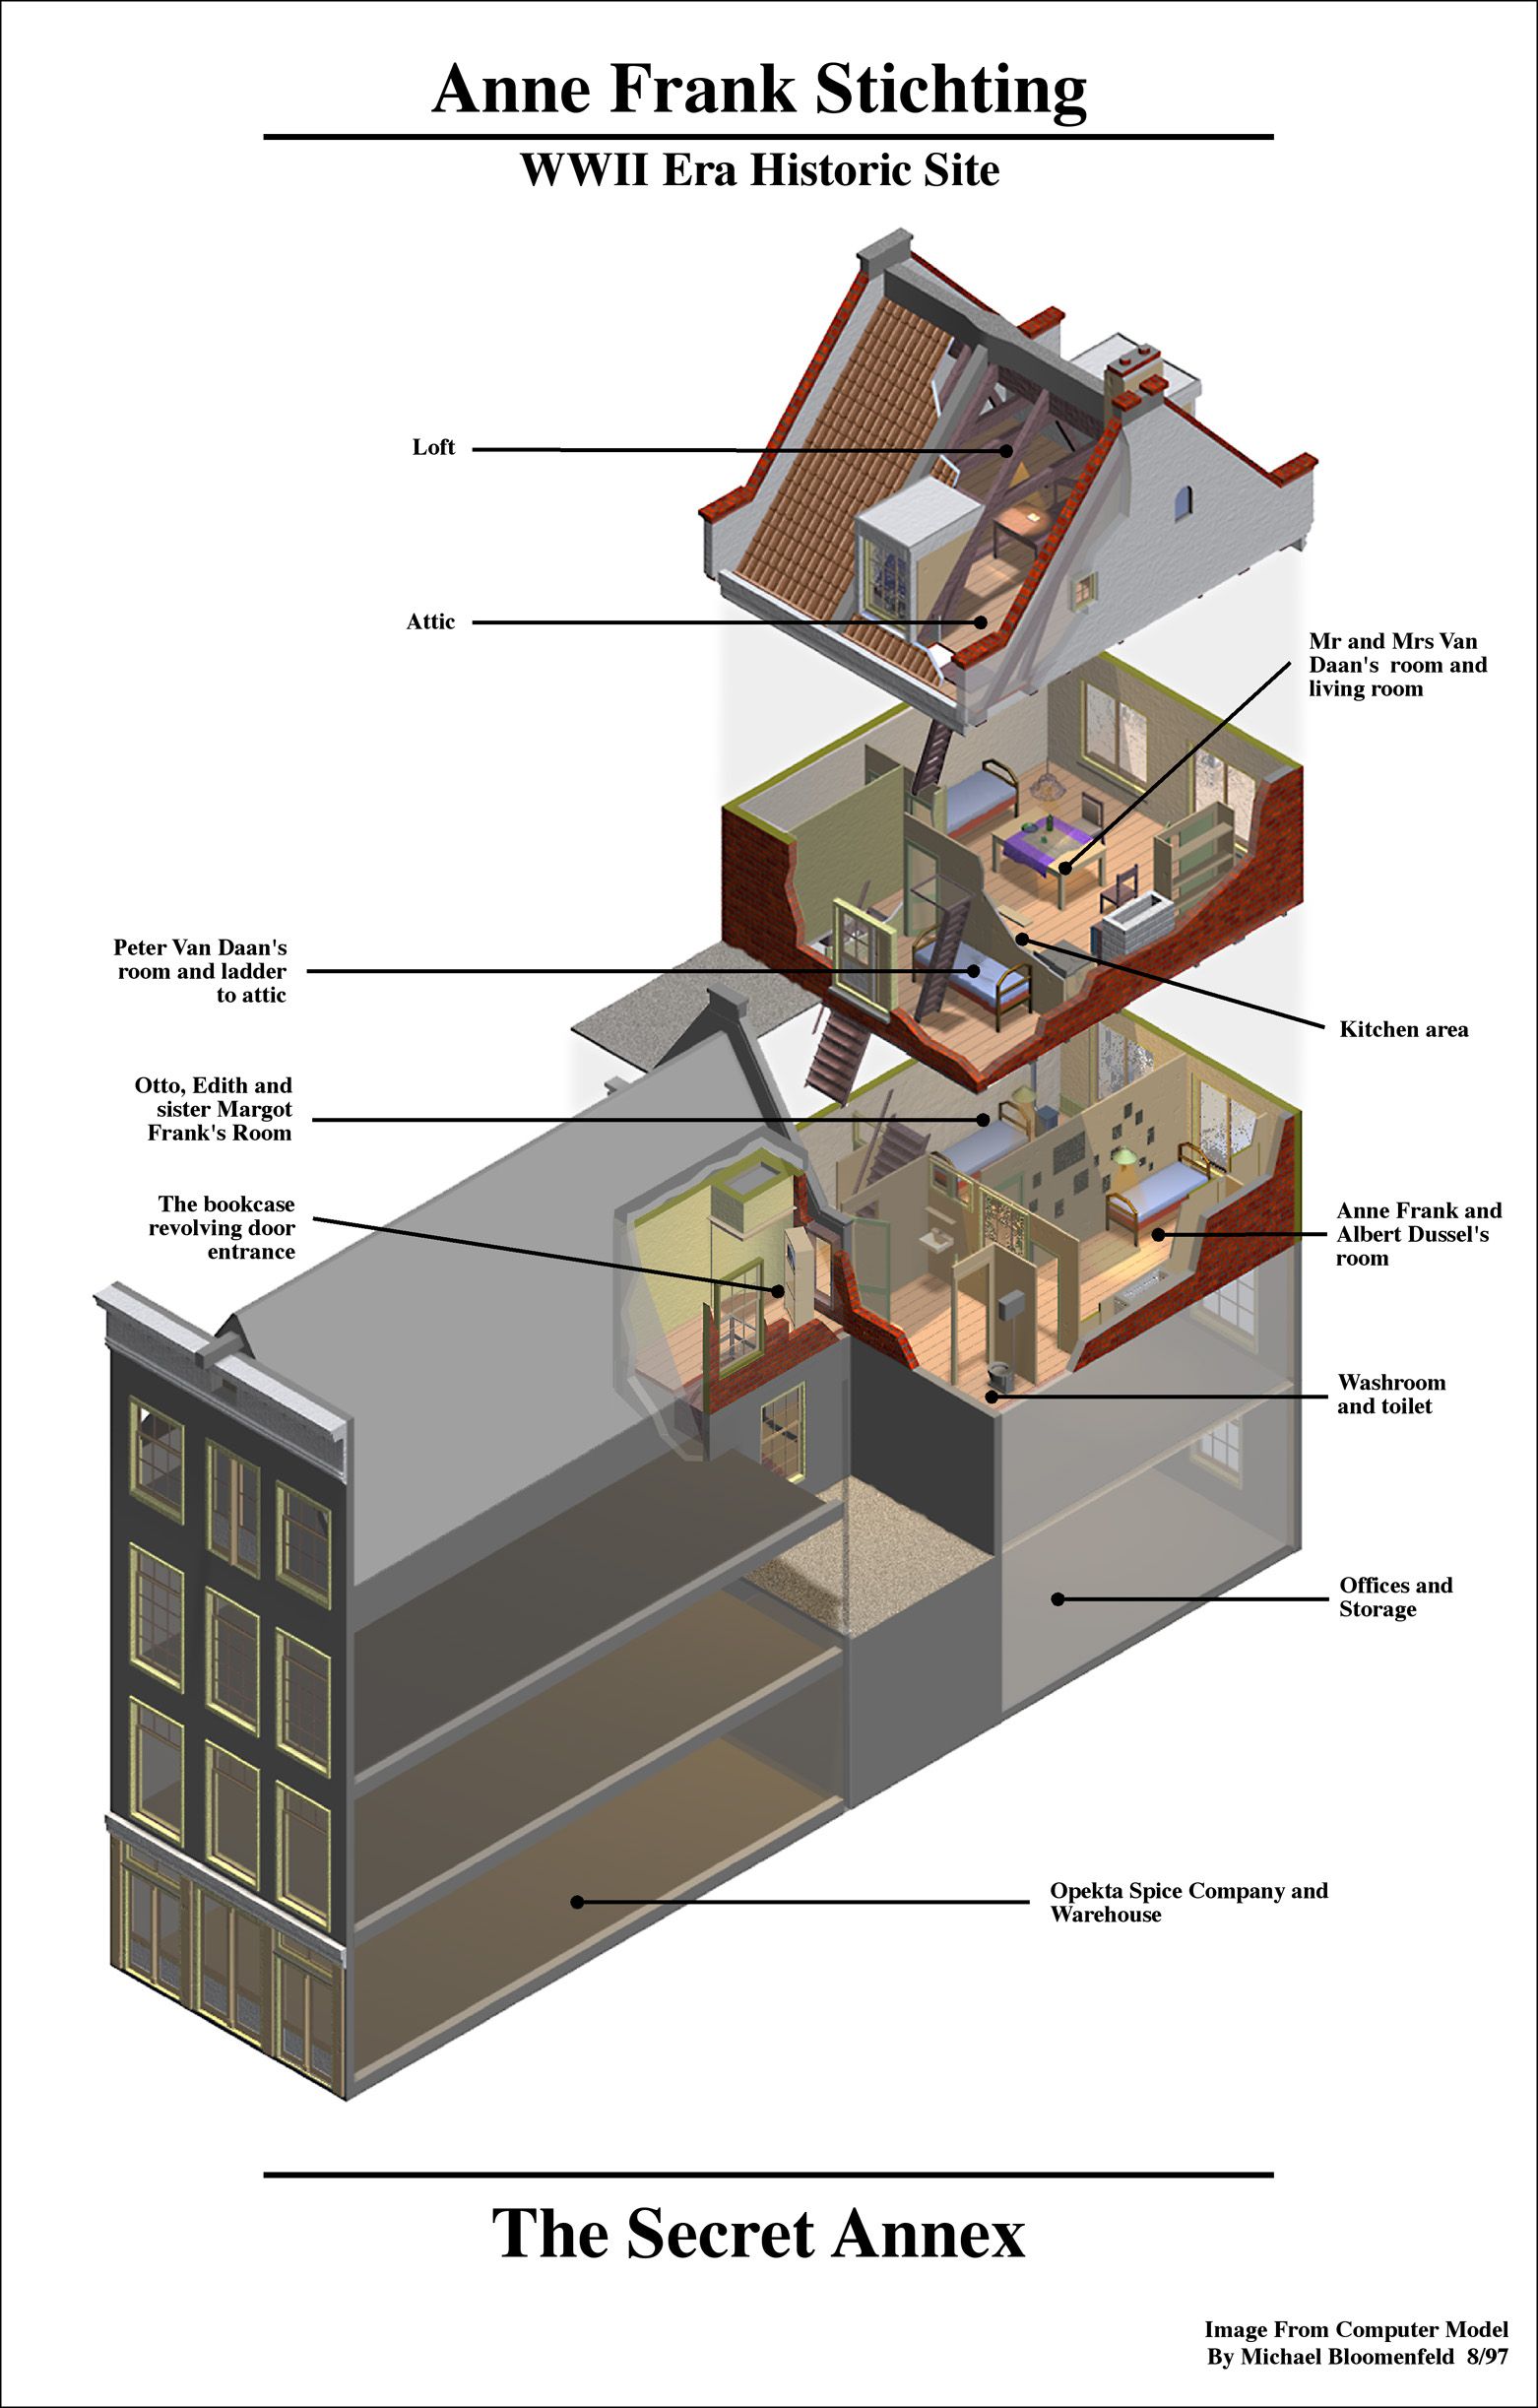 A diagram of a structural annex to a building featuring multiple levels and rooms, including an attic, bedrooms, kitchen and bathroom.